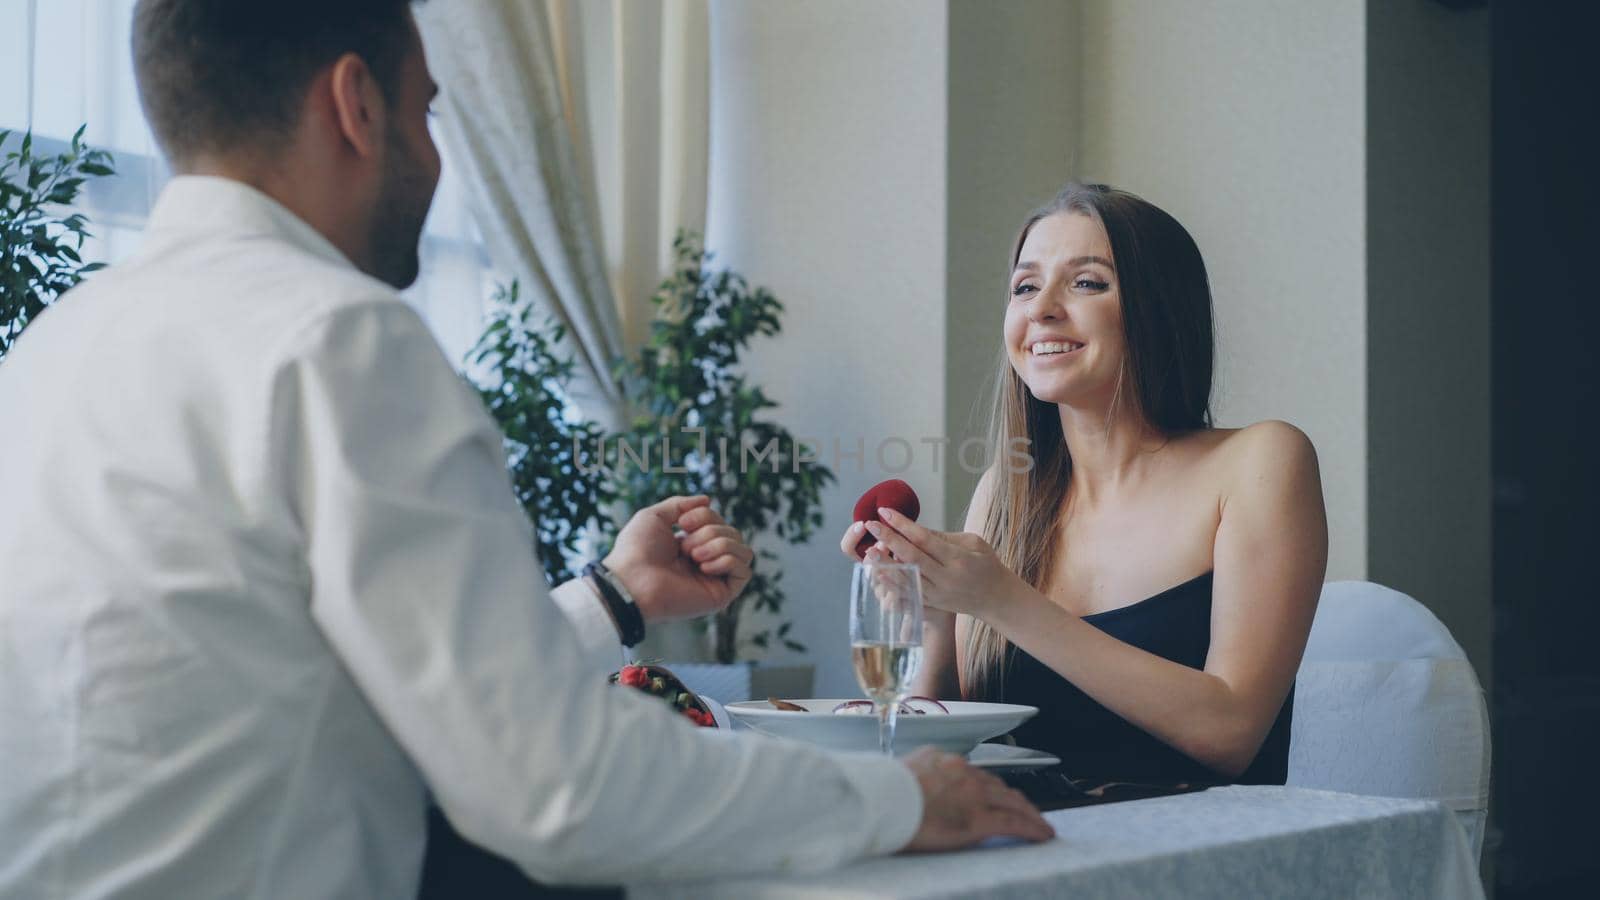 Beautiful young woman is happy and surprised after getting marriage proposal from her boyfriend in restaurant.